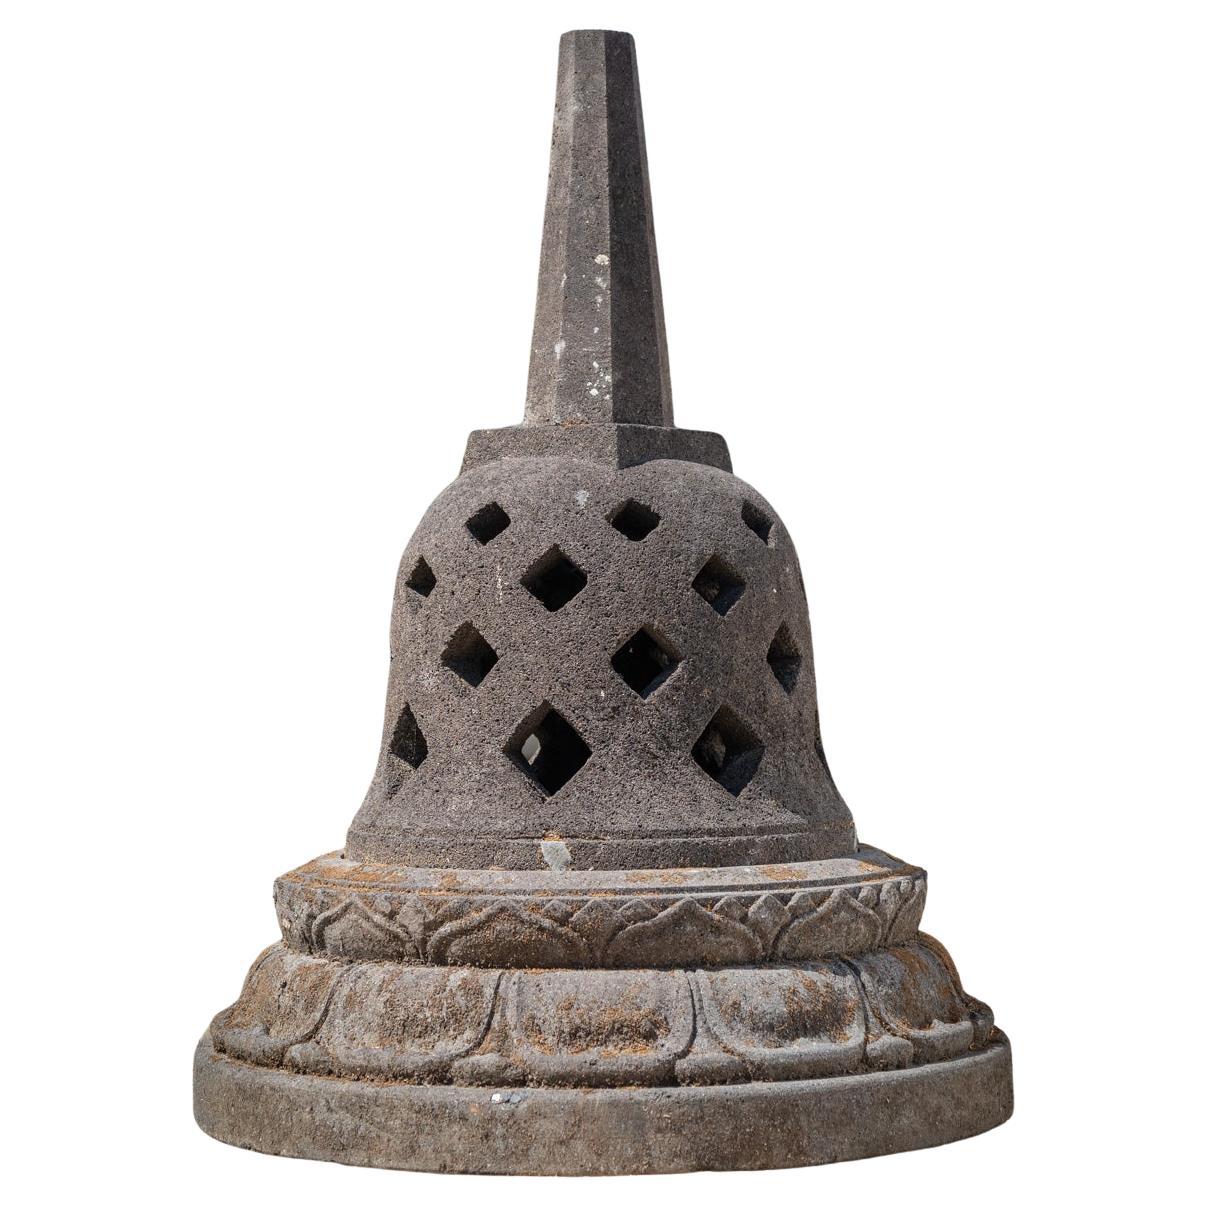 Middle 20th century old lavastone Stupa from Indonesia  OriginalBuddhas For Sale